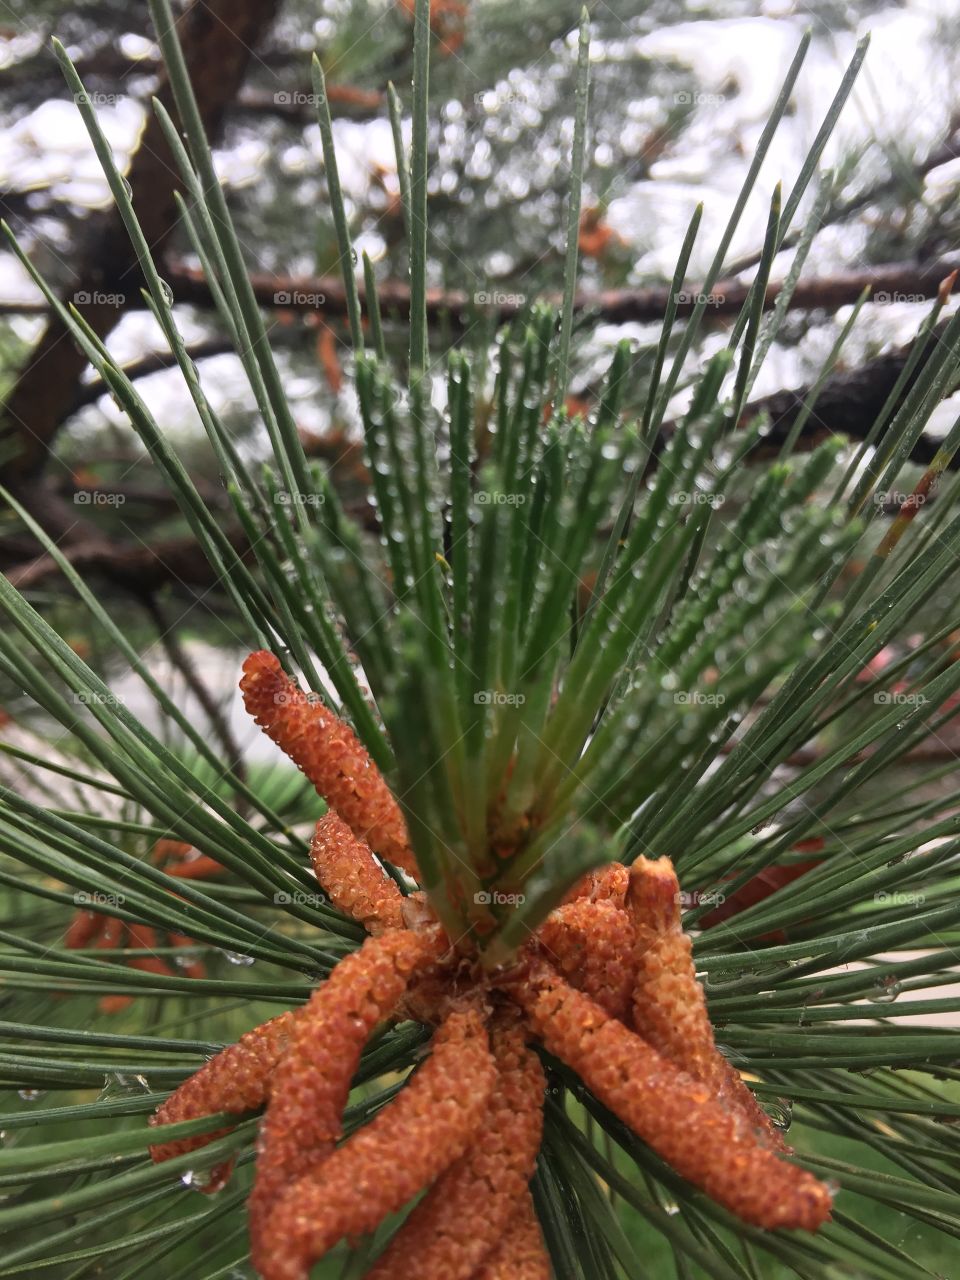 A tip of a pine trees’ branch. Adorned with water droplets and pine cones. 